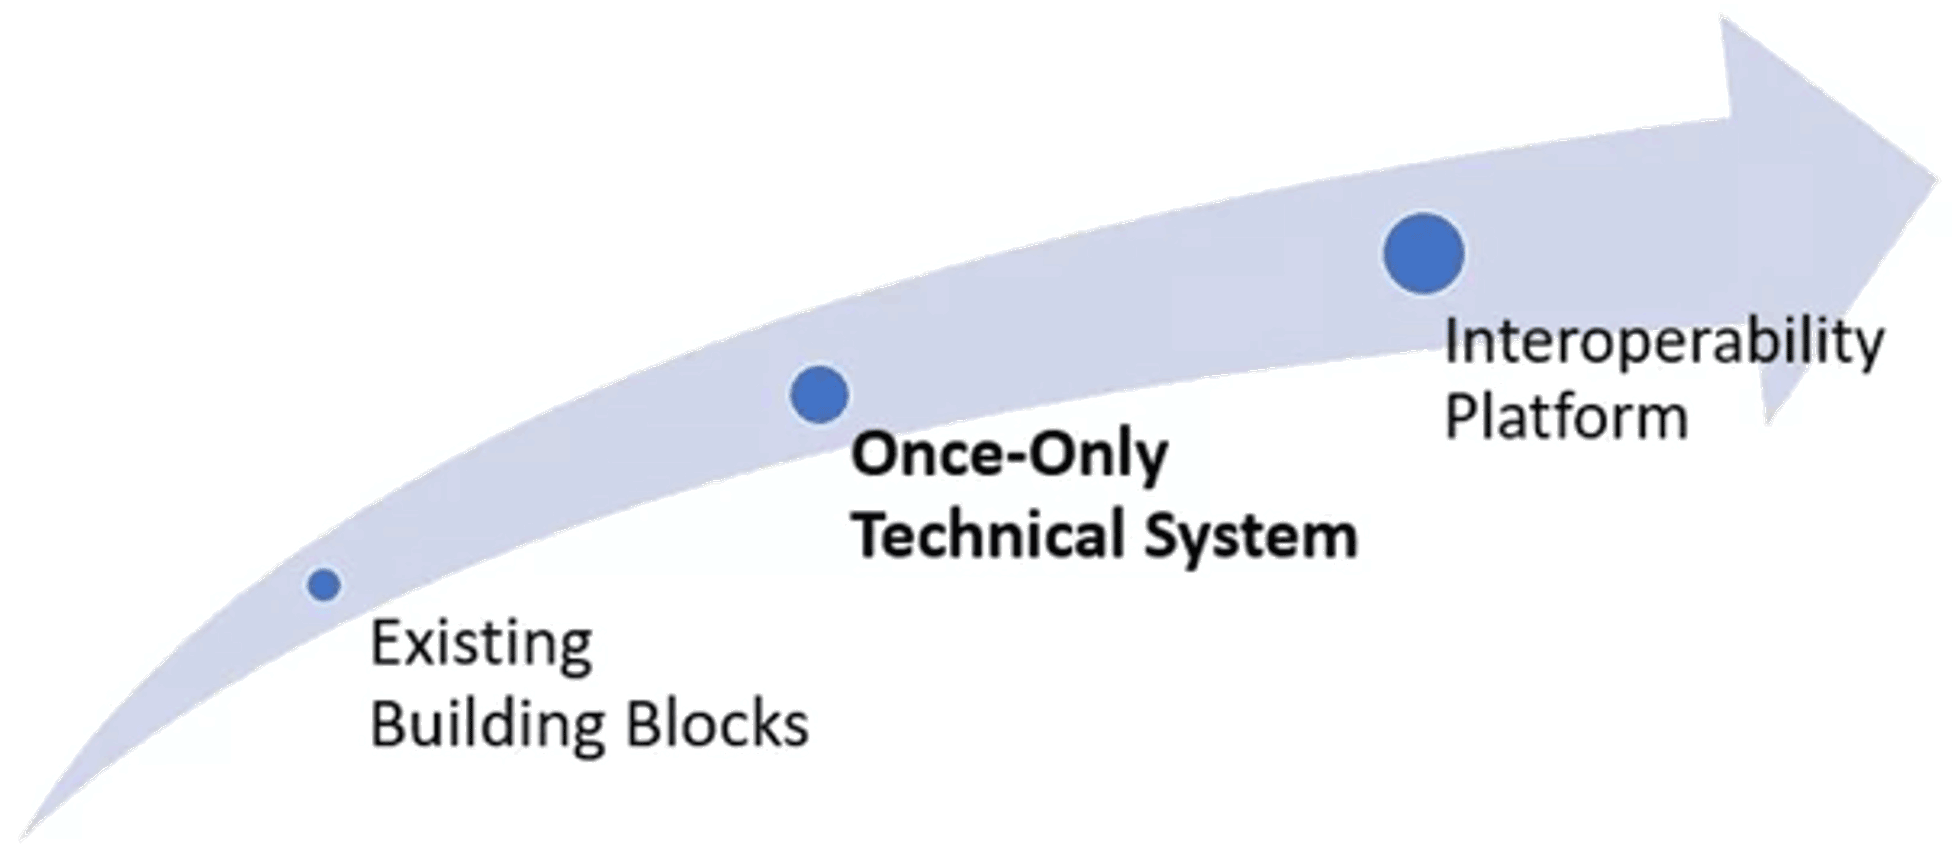 Stages towards a fully interoperable platform (source: https://www.de4a.eu, accessed July 29, 2022)